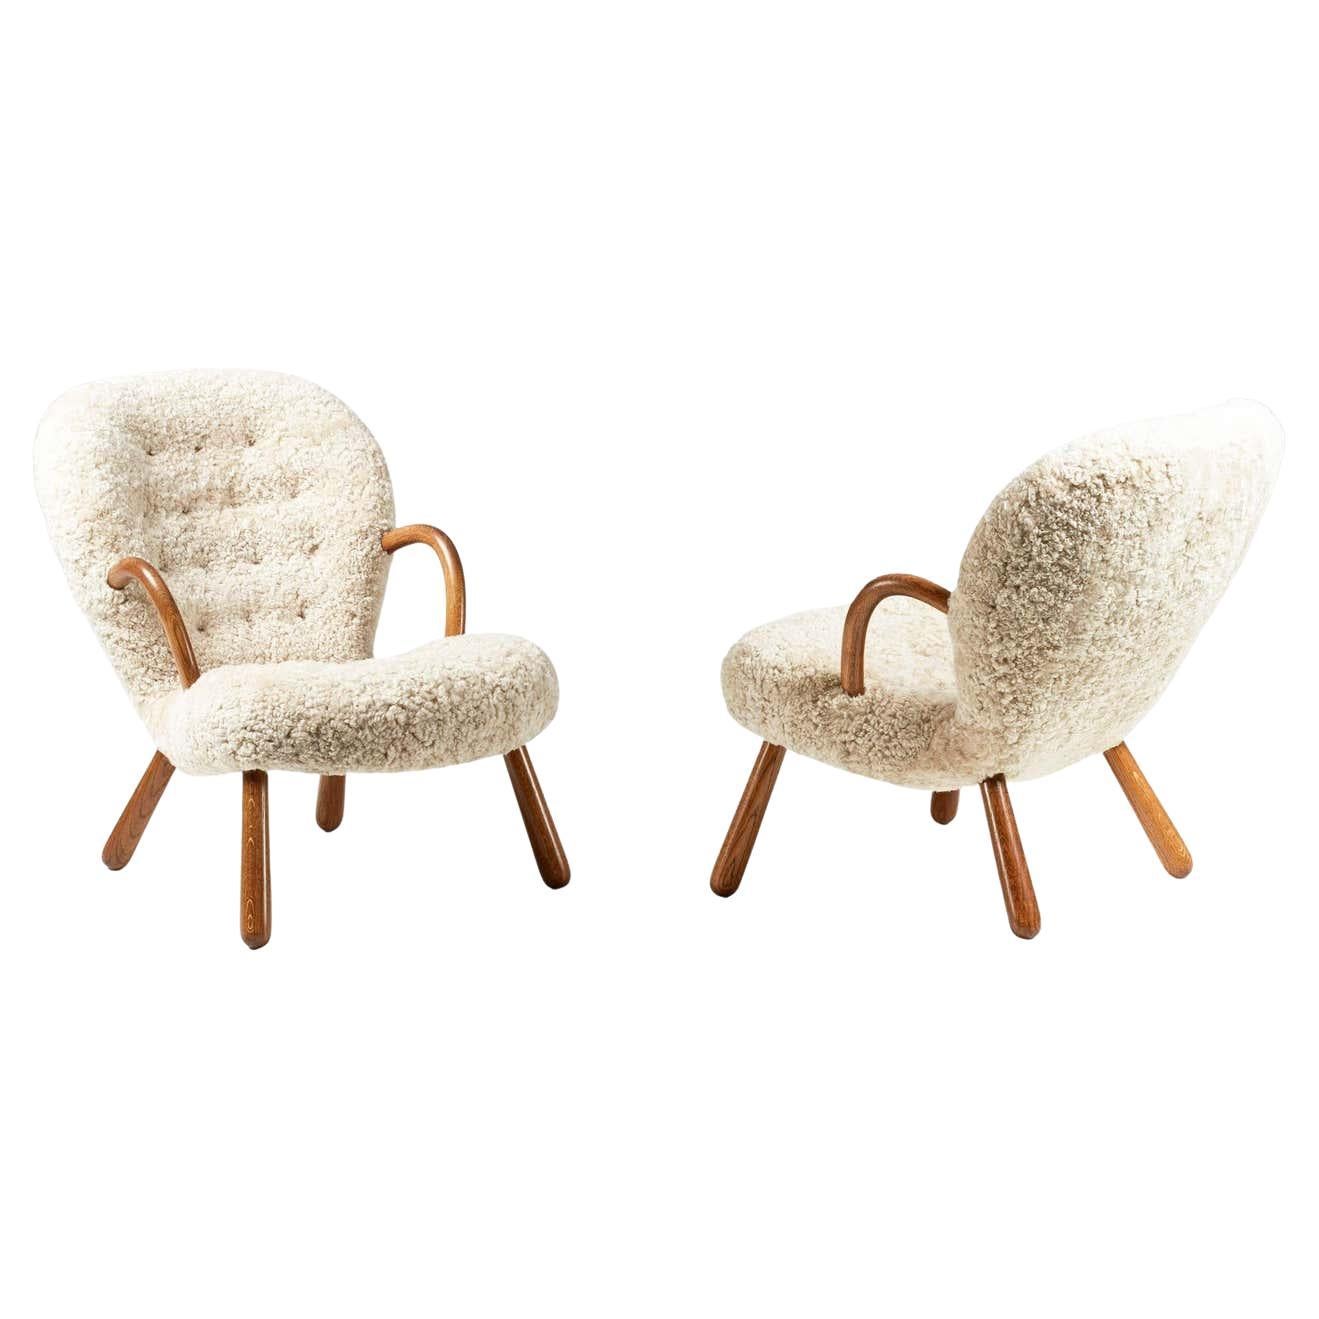 Sheepskin Clam Chairs by Arnold Madsen - New Edition